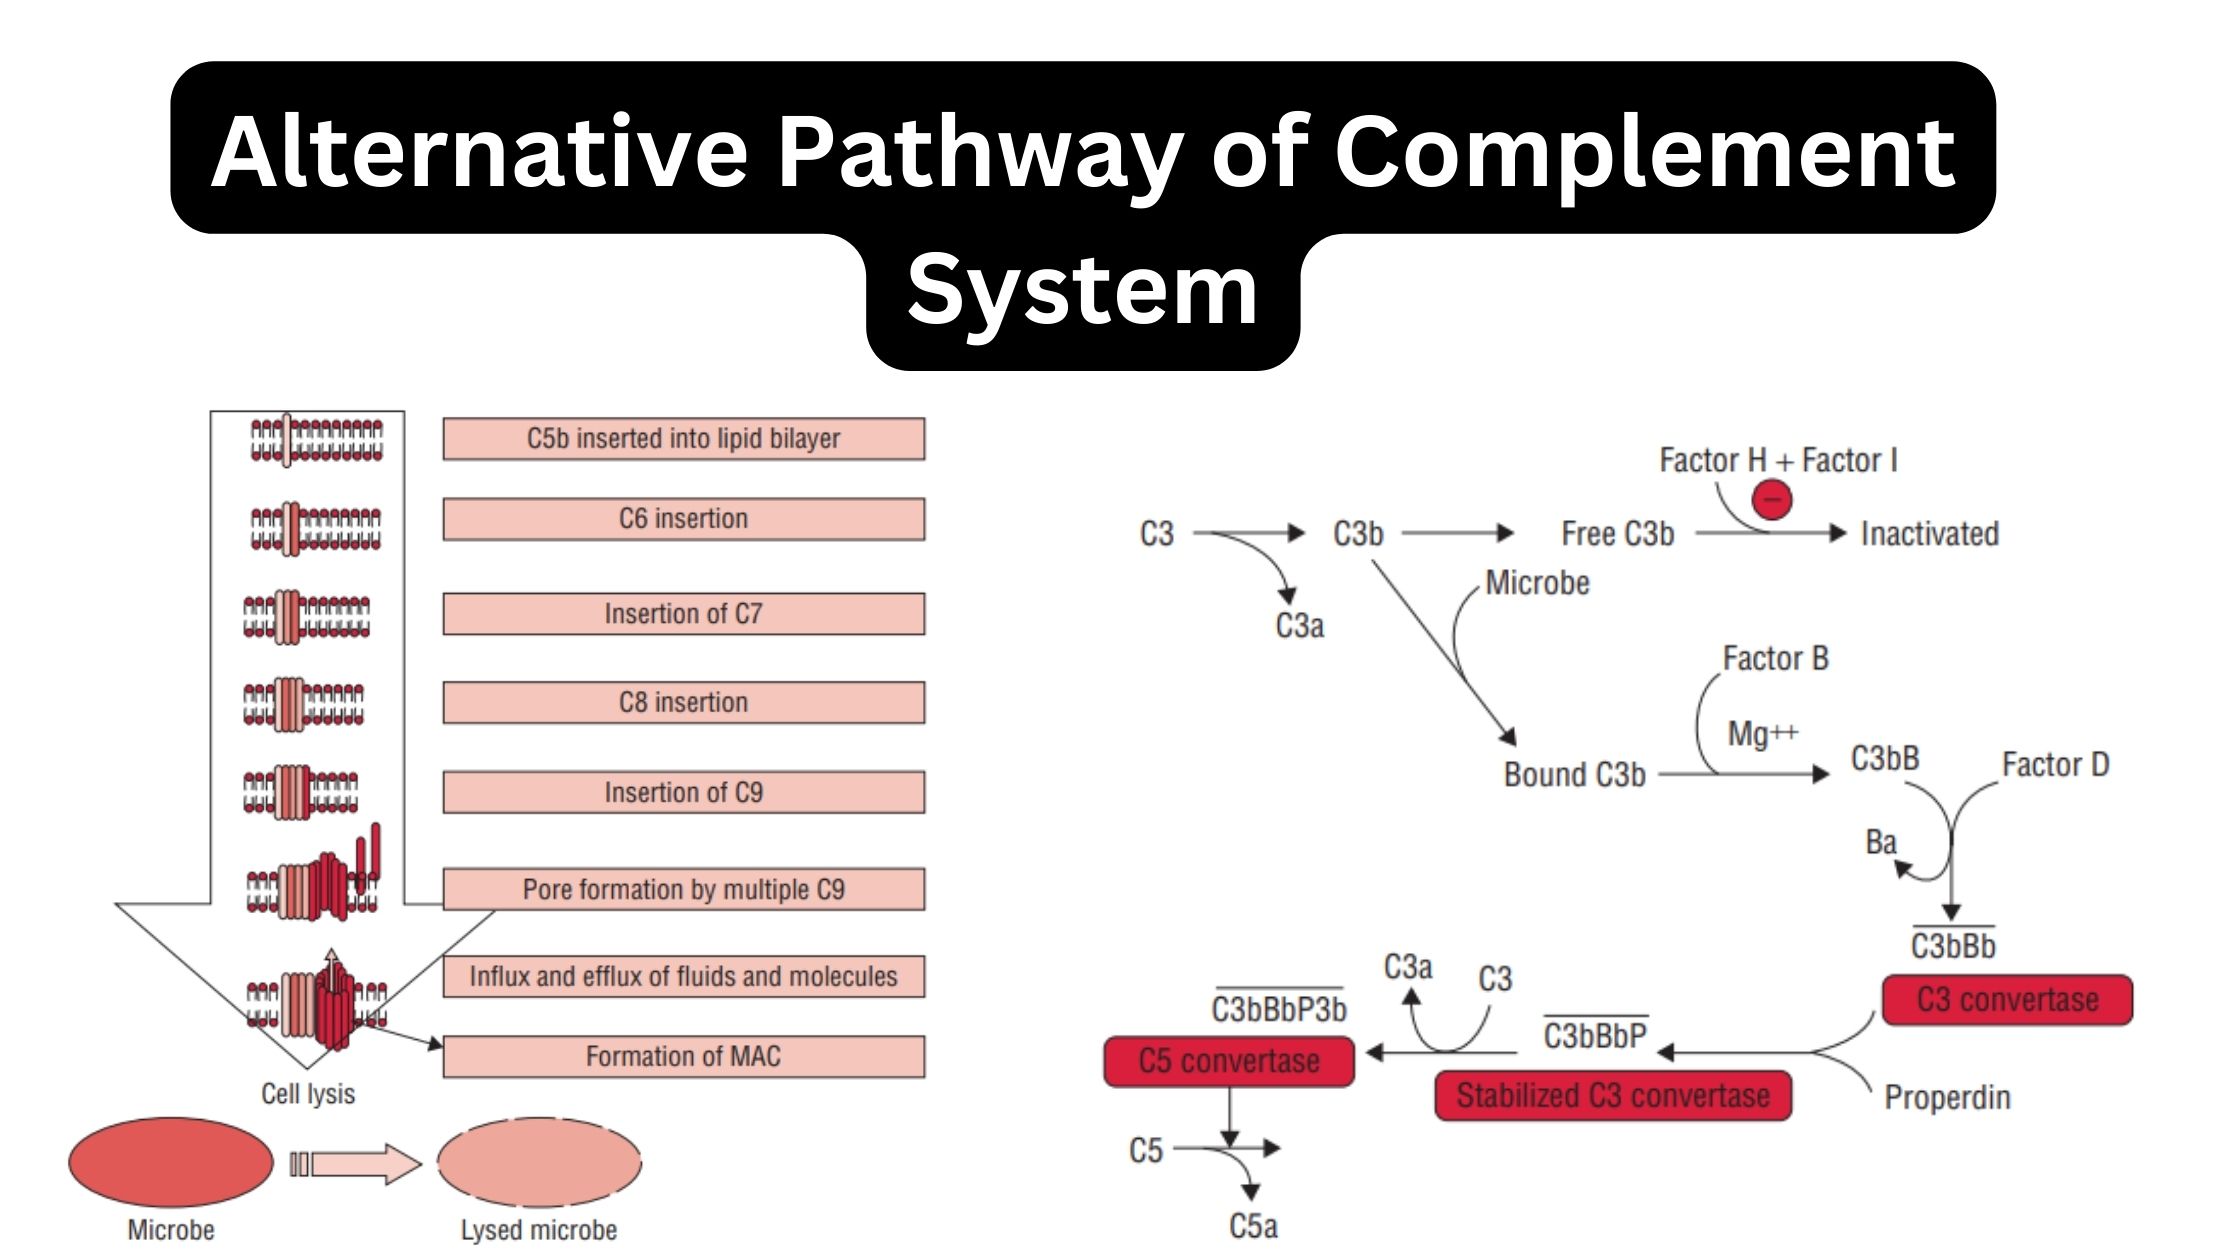 Alternative-Pathway-of-Complement-System.jpg#s-2240,1260